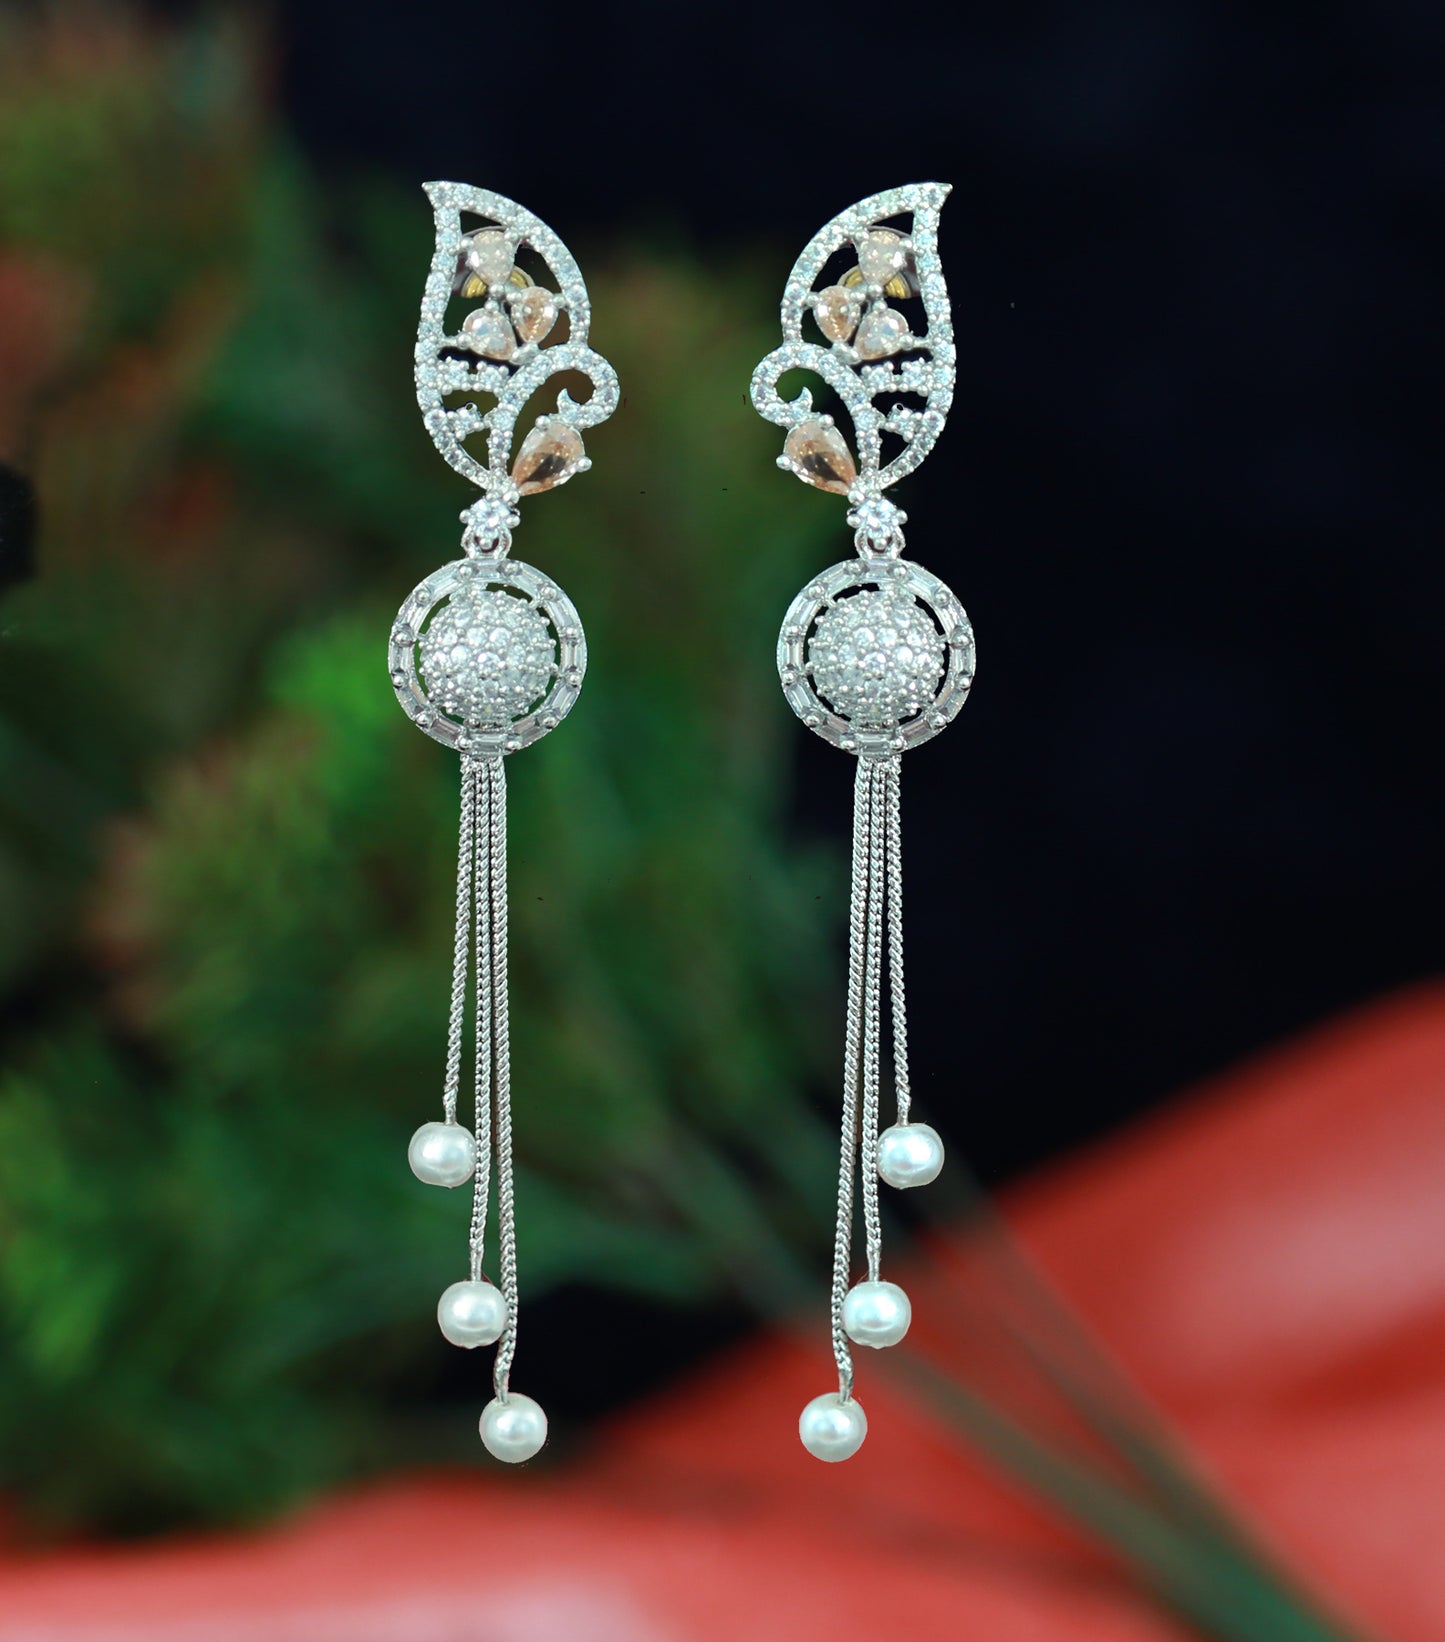 American Diamond Floral Design Silver Tone Earrings with Pearls and Color Stones